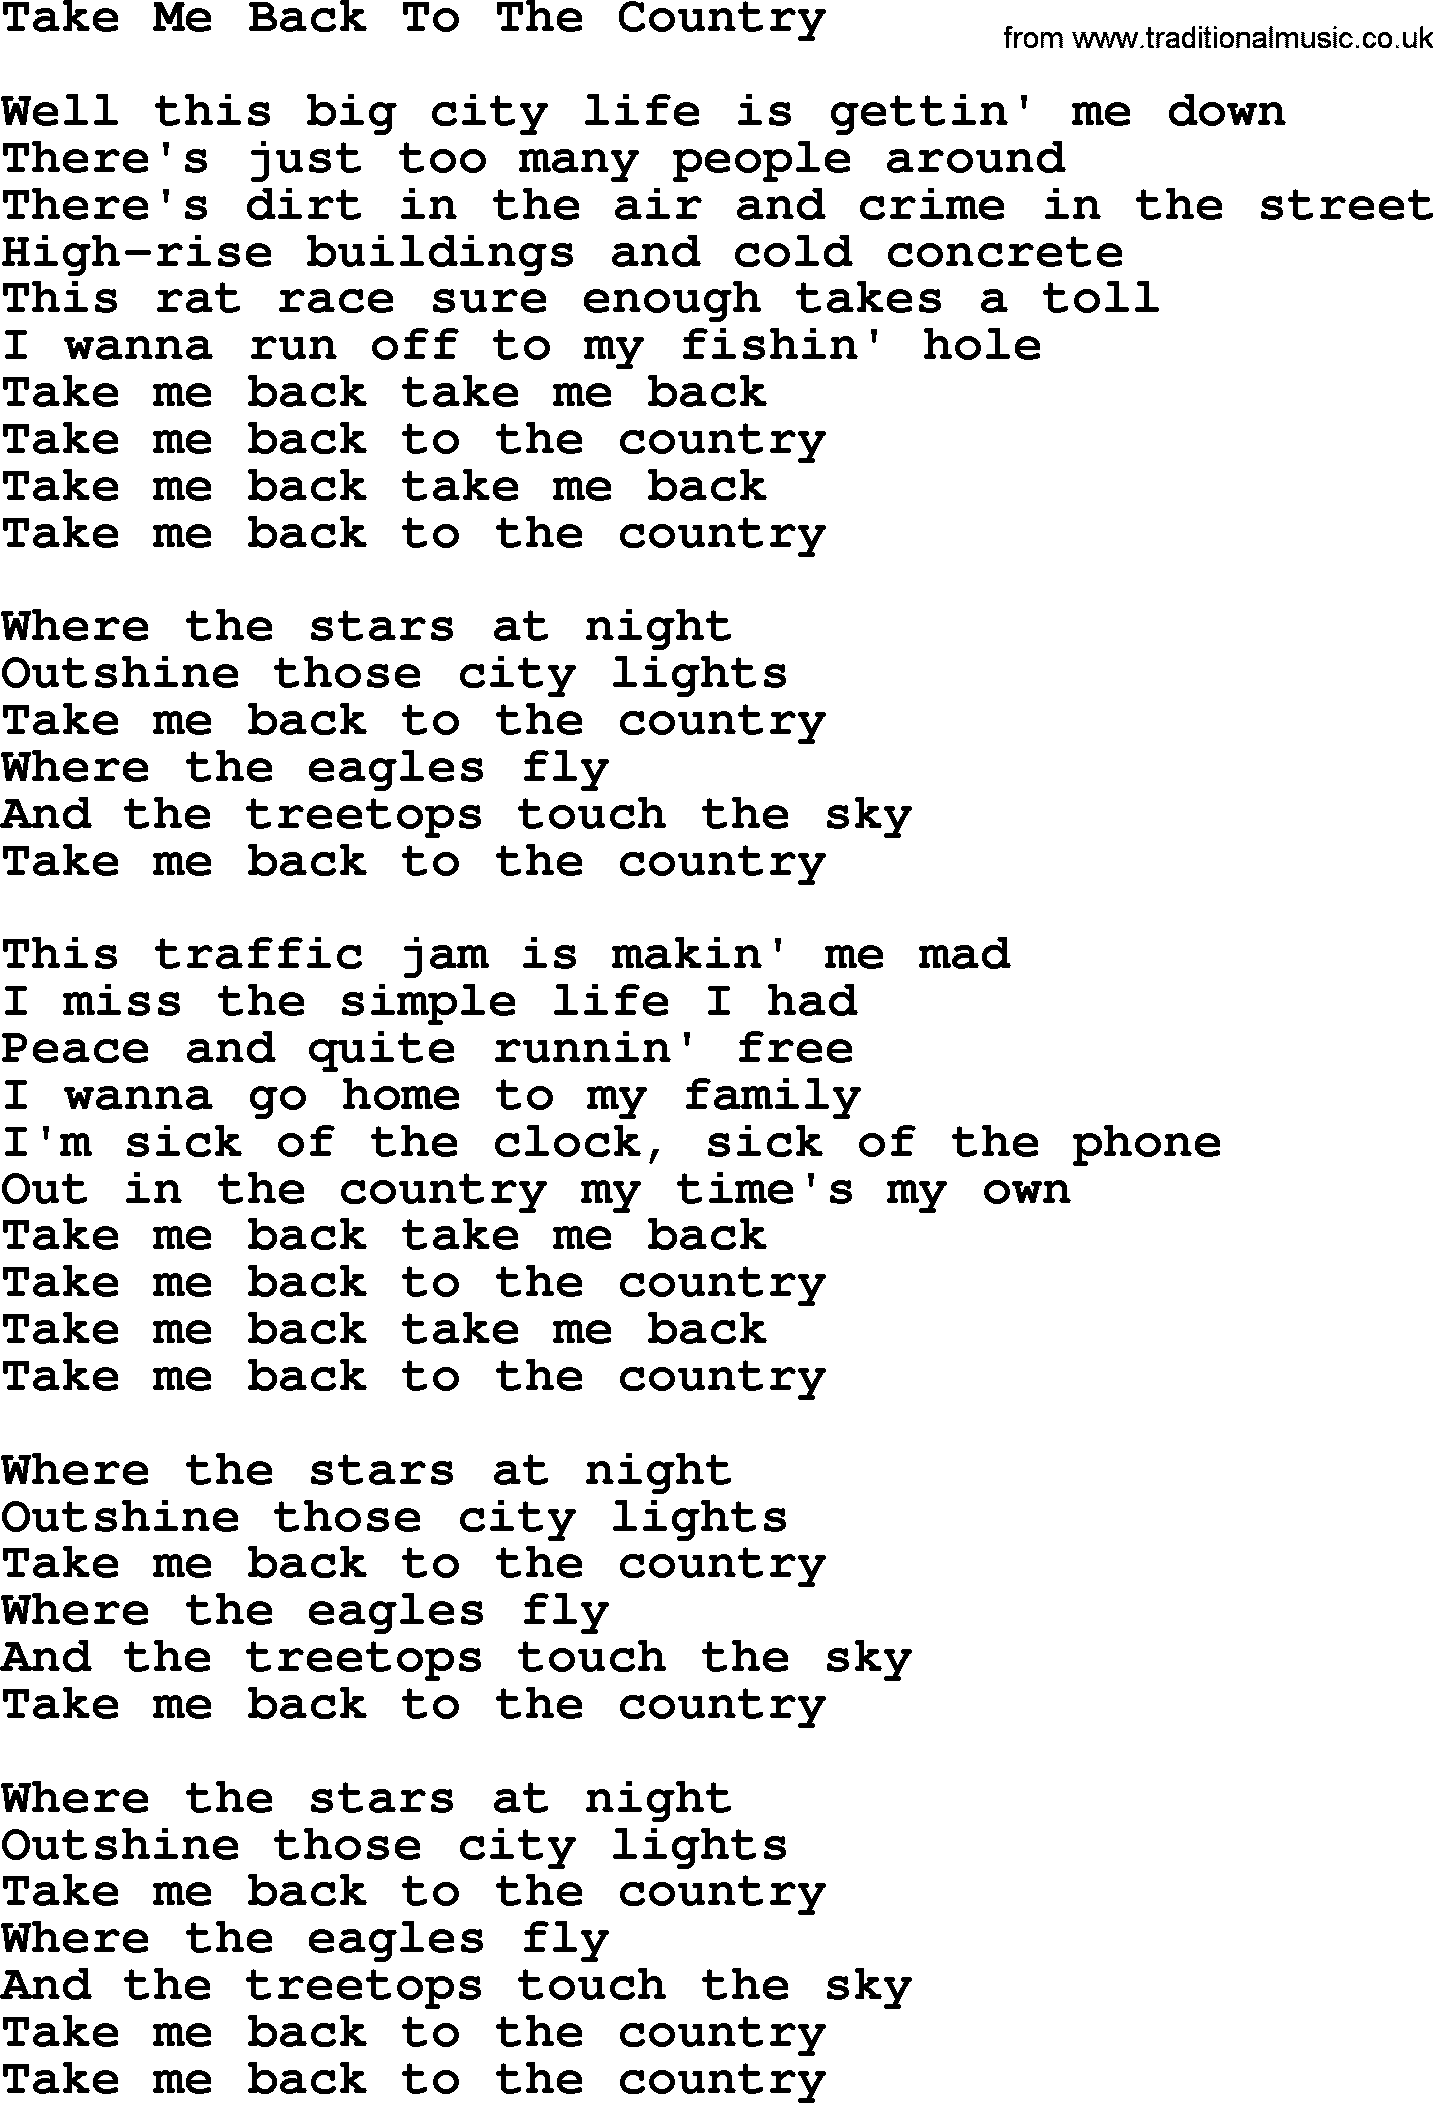 Dolly Parton song Take Me Back To The Country.txt lyrics